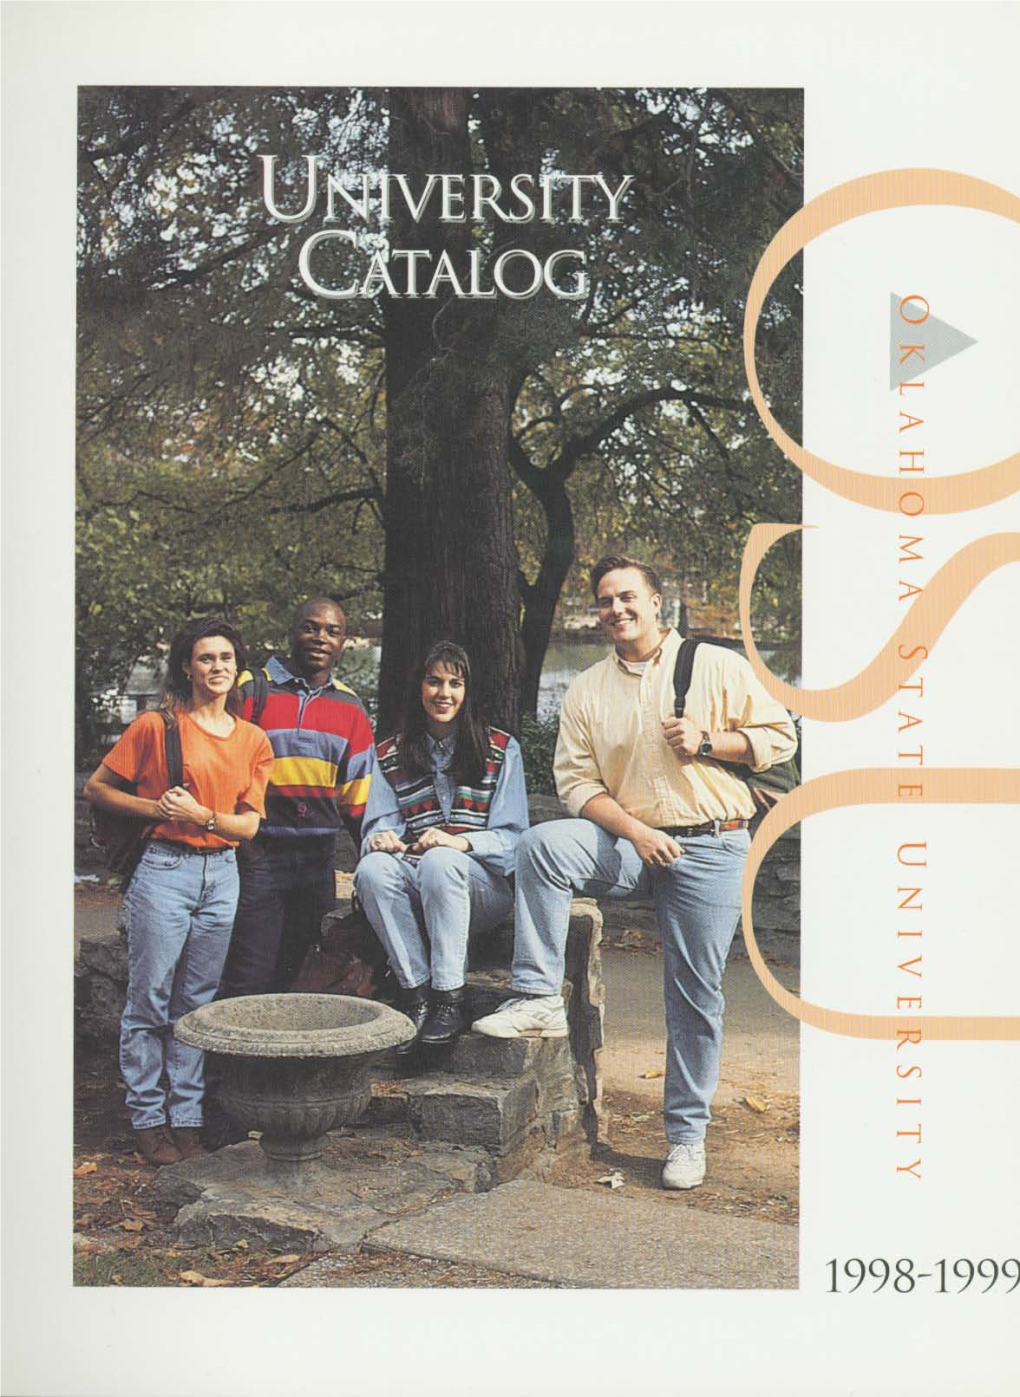 1998-1999 This Catalog Offers Information About the Academic Programs and Support Services of the University